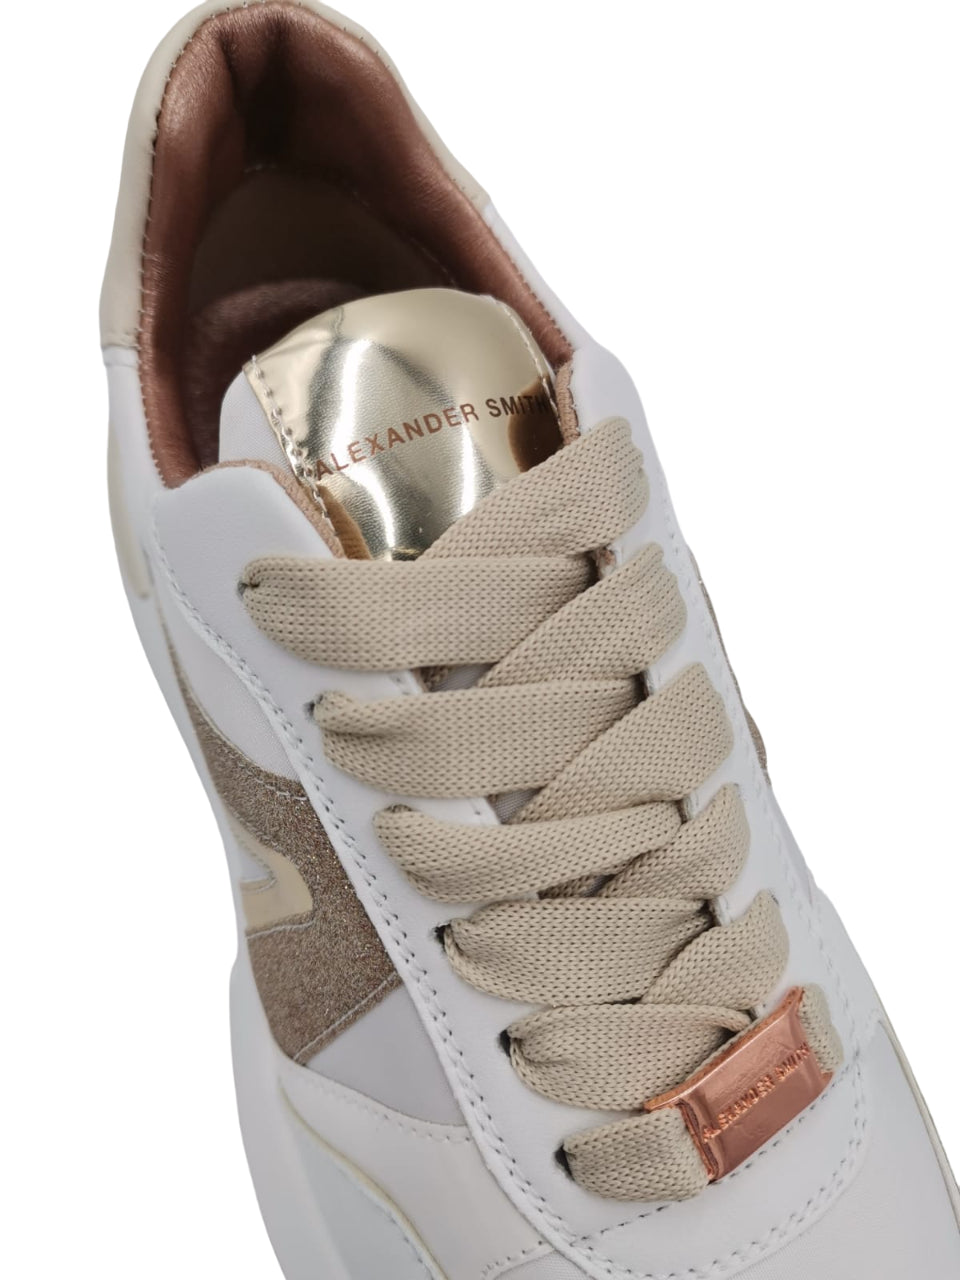 Sneakers Alexander Smith Donna Hyde Woman Bianco/oro